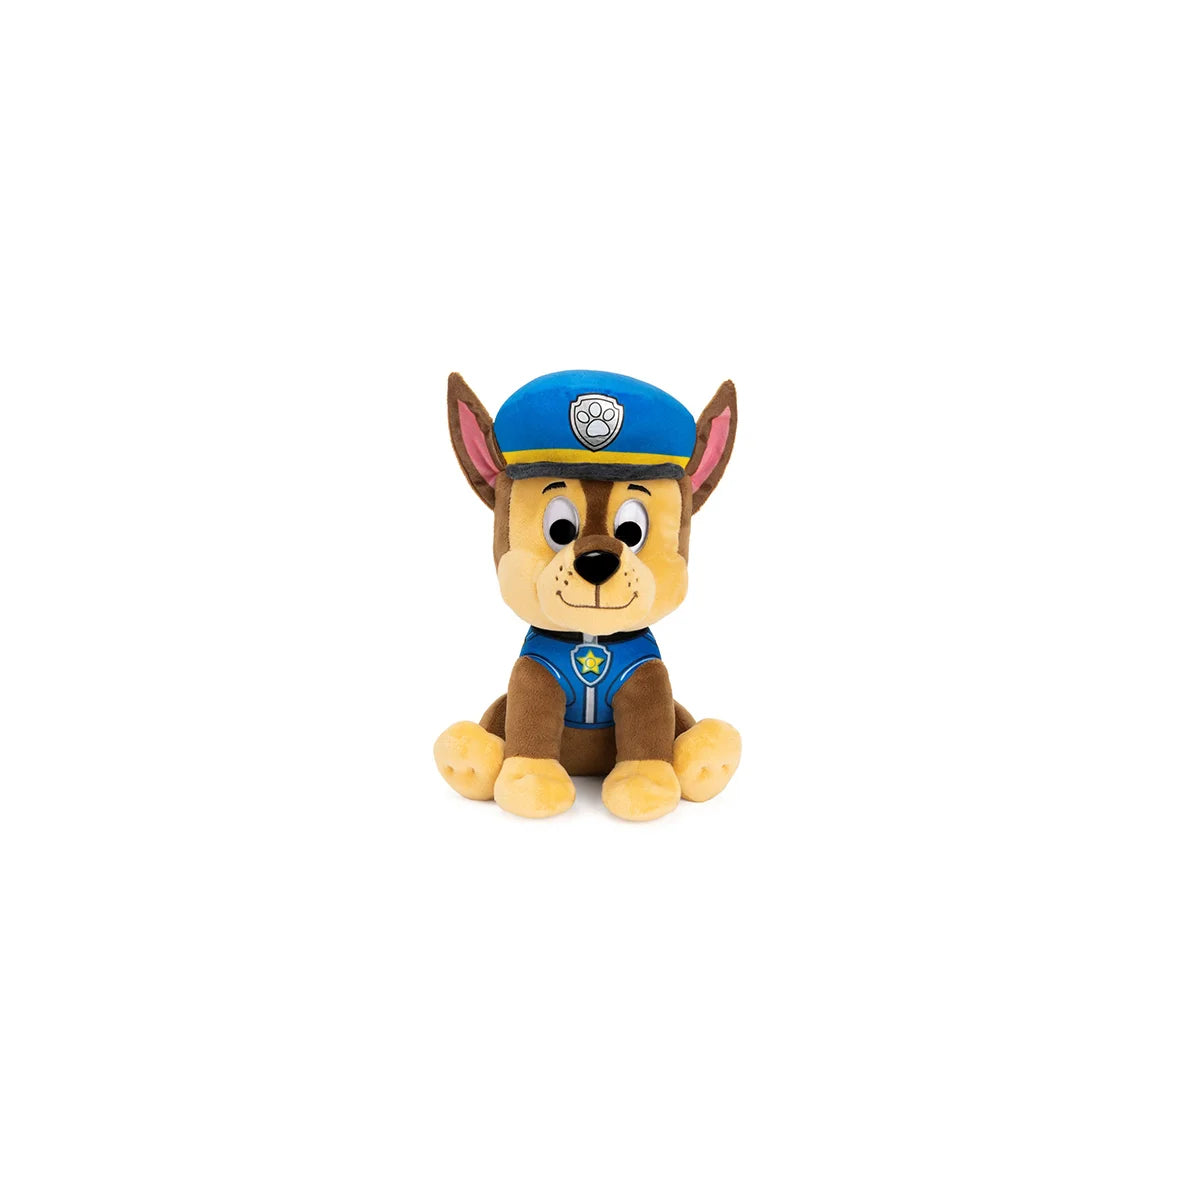 GUND Paw Patrol Chase in Signature Police Officer Uniform for Ages 1 and Up, 9" - Plush Toys Heretoserveyou